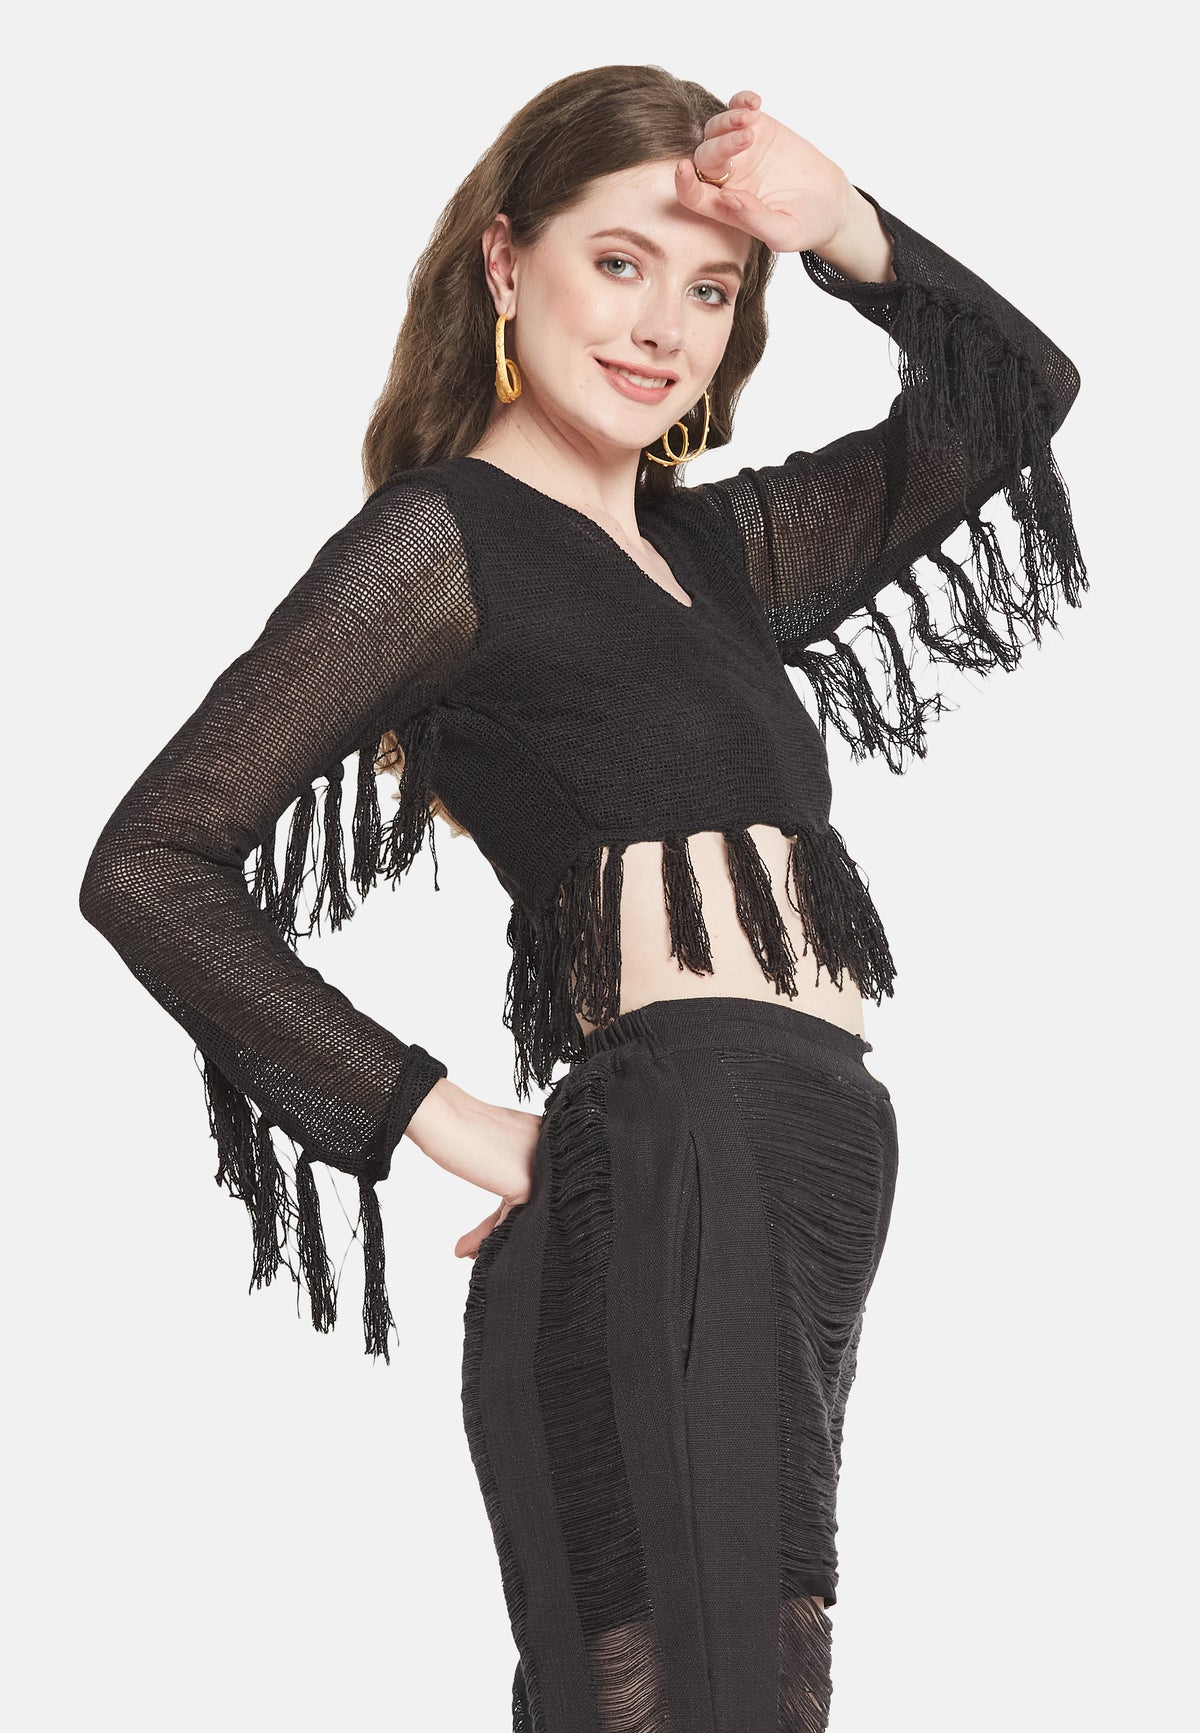 Whimsy Black Top